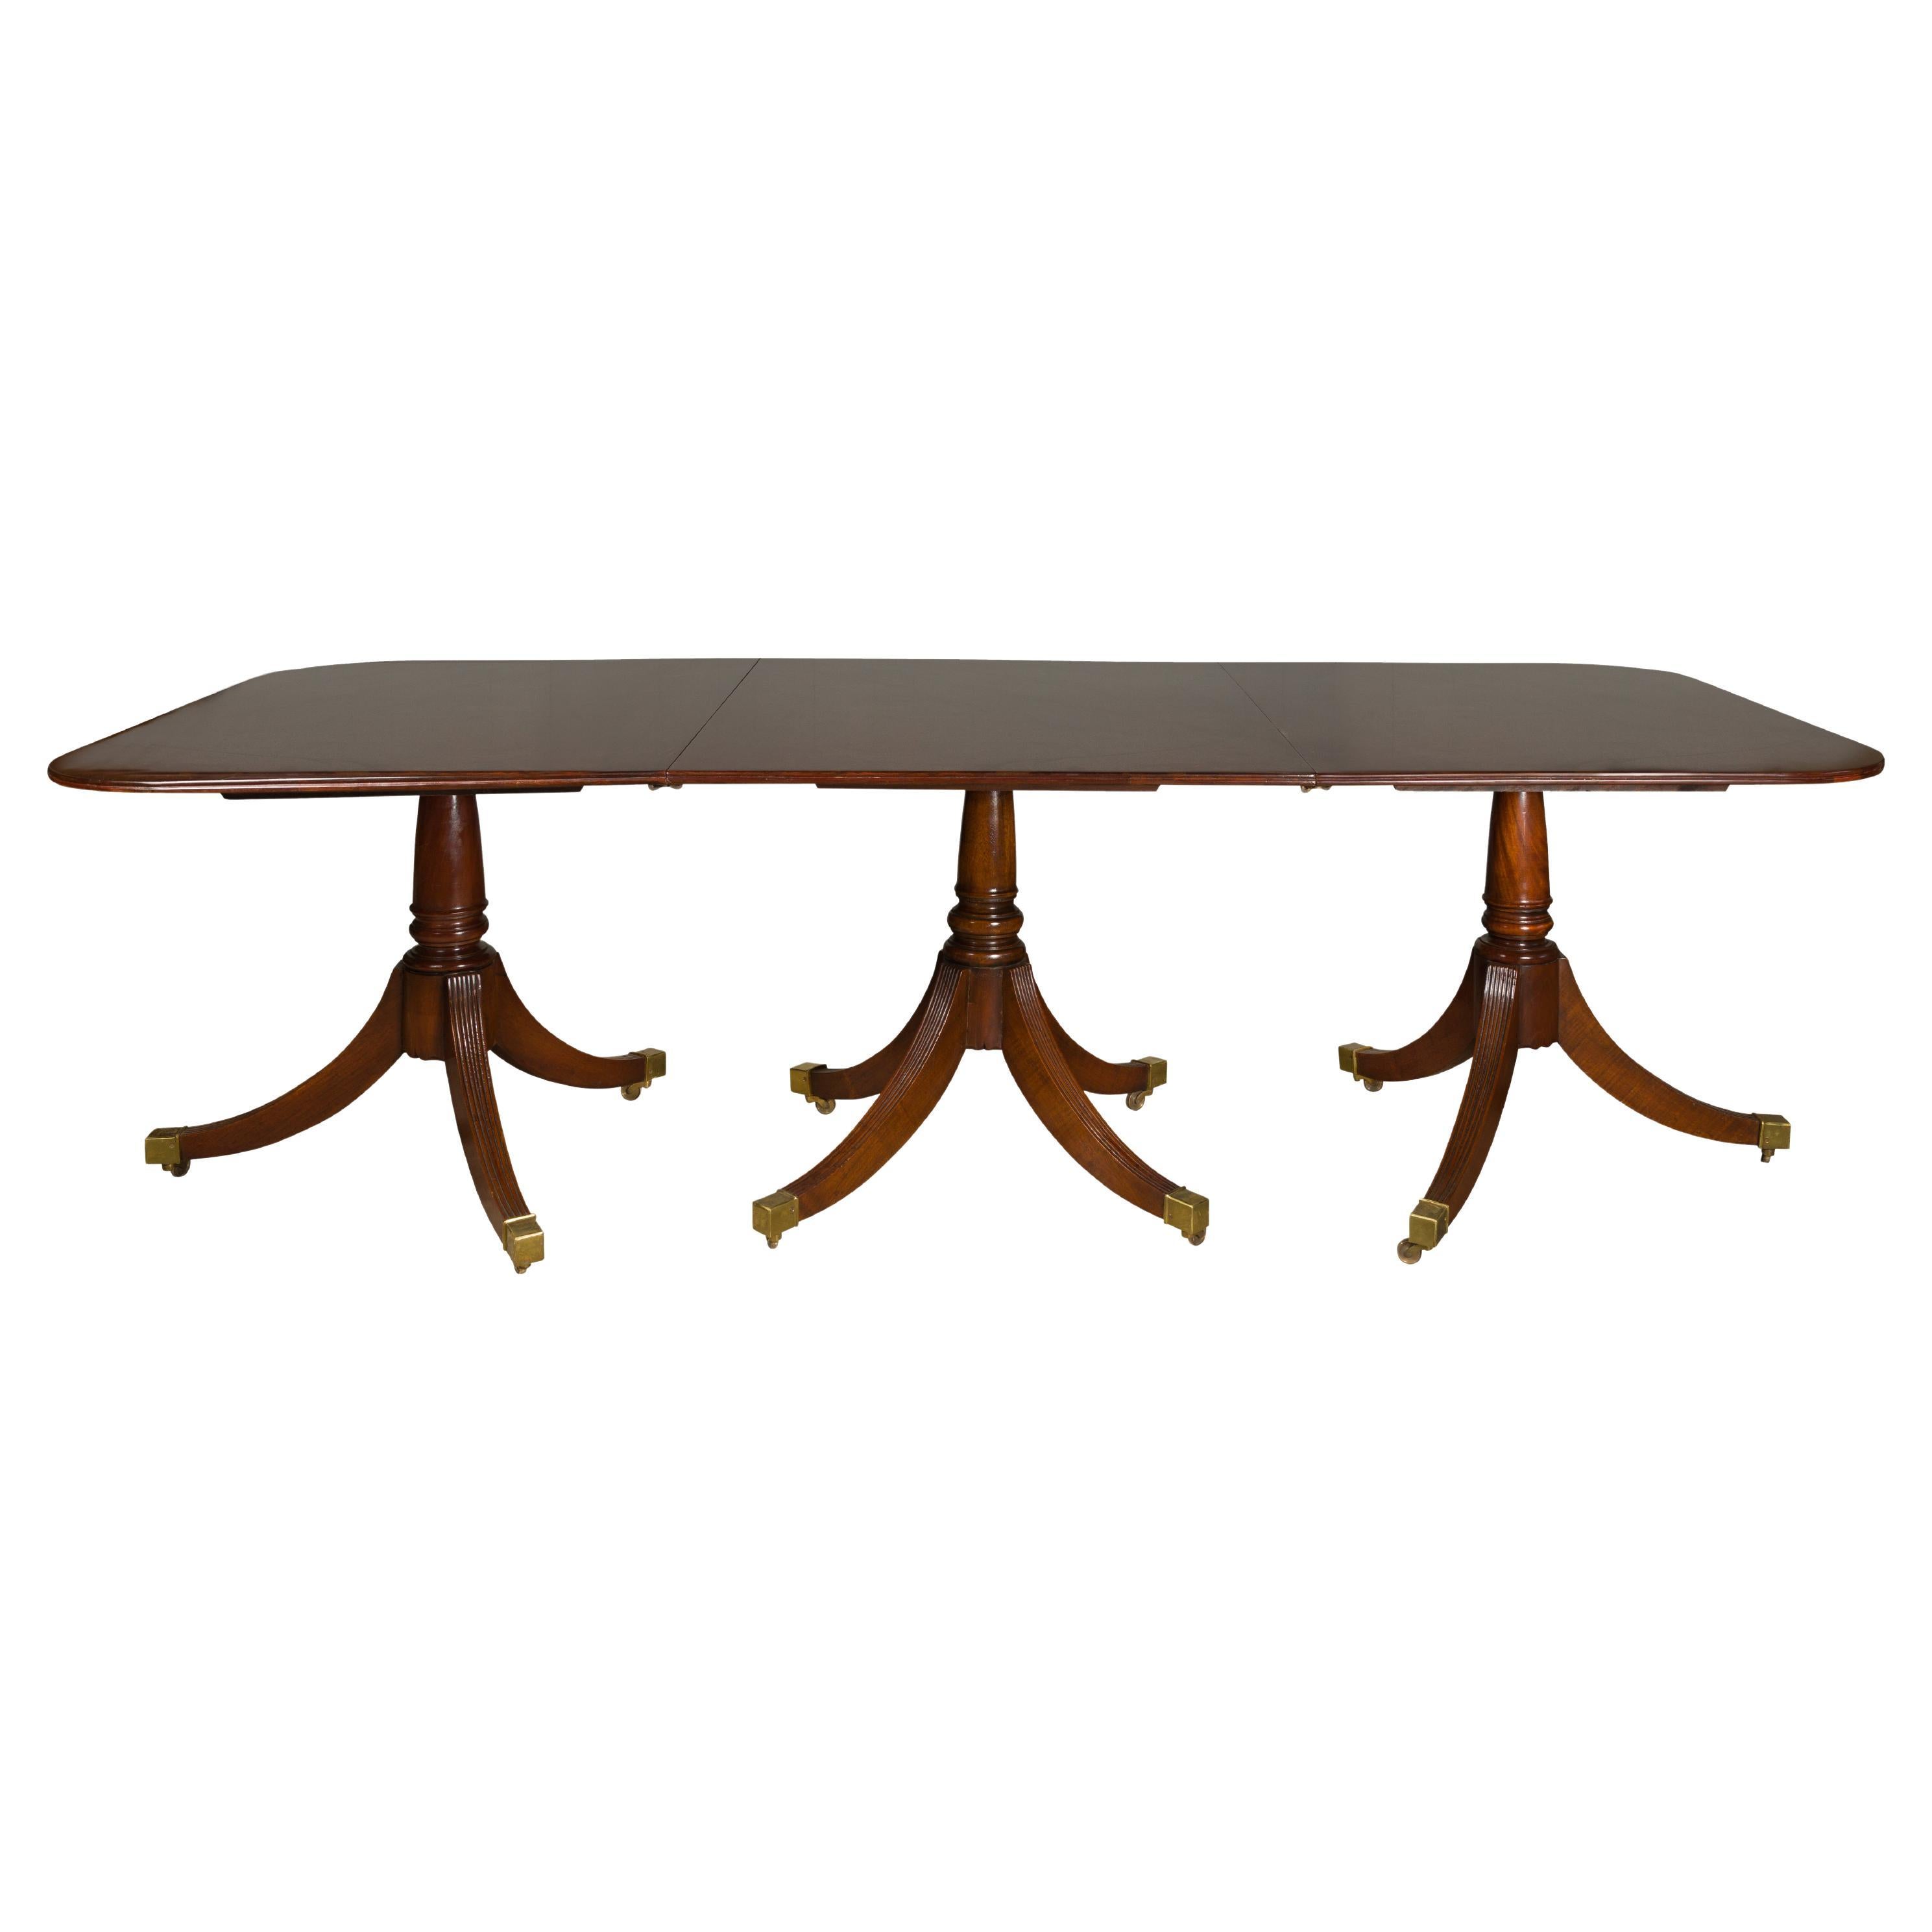 English Turn of the Century Mahogany Extension Dining Table with Quadripod Base